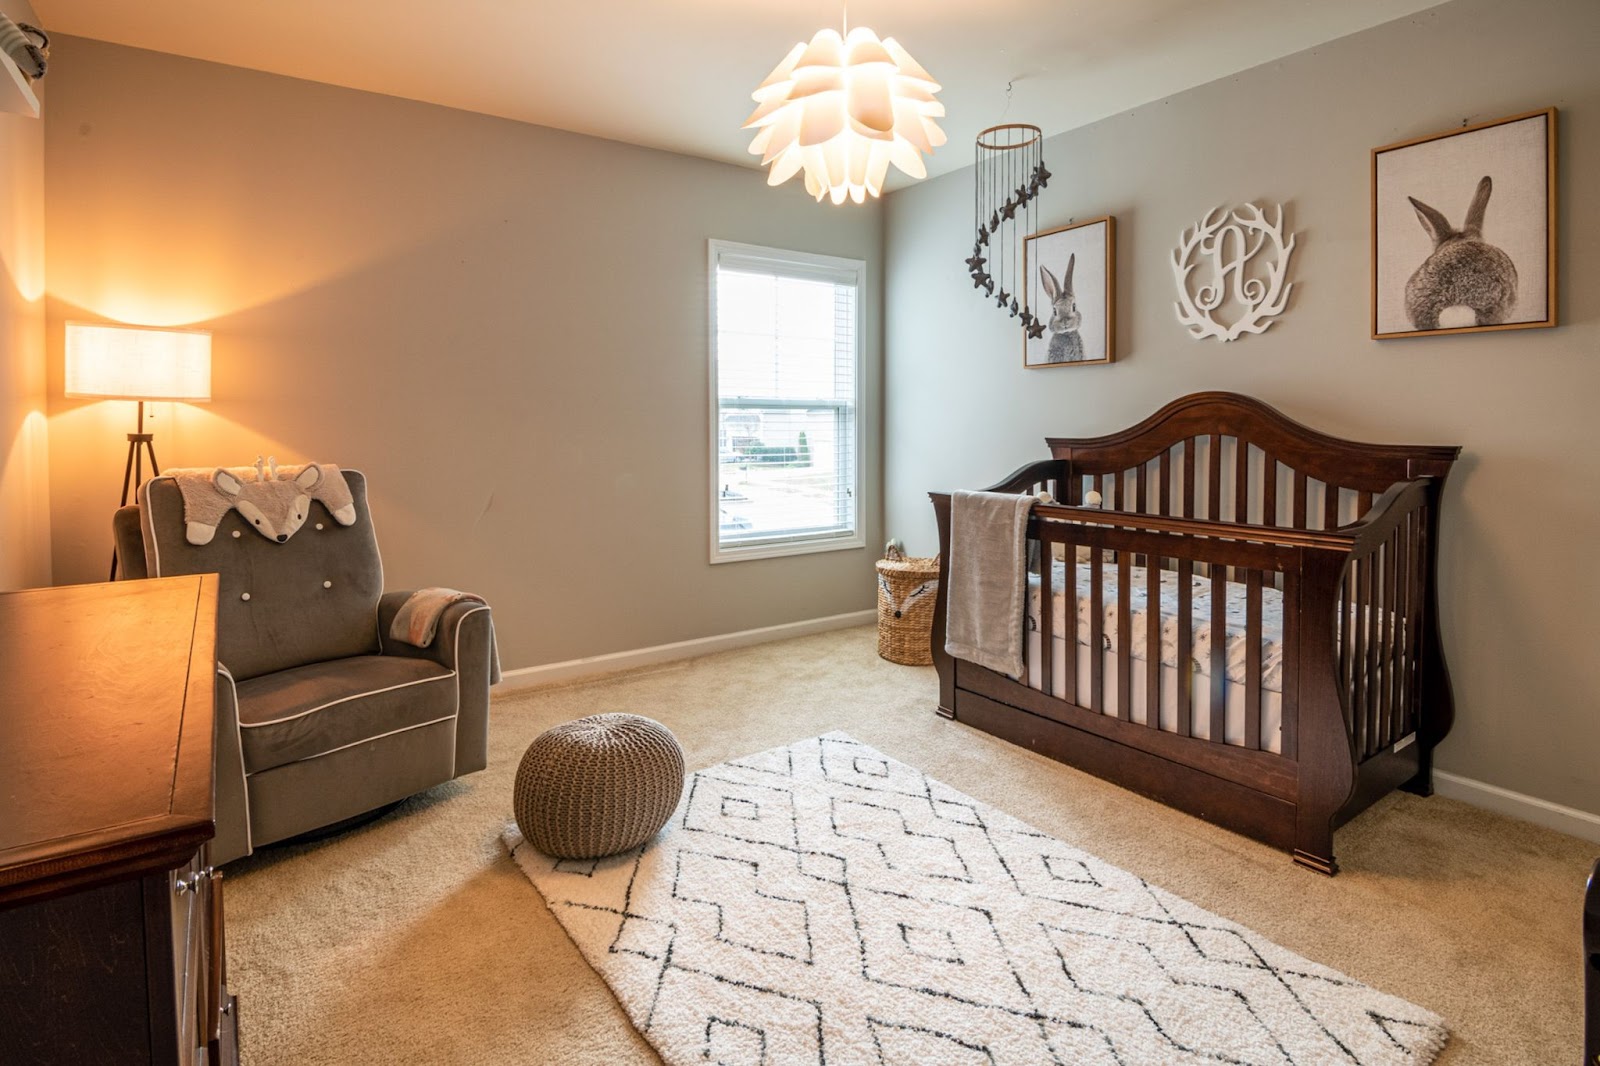 Baby Nursery: Tips and Tricks To Complete Your Nursery